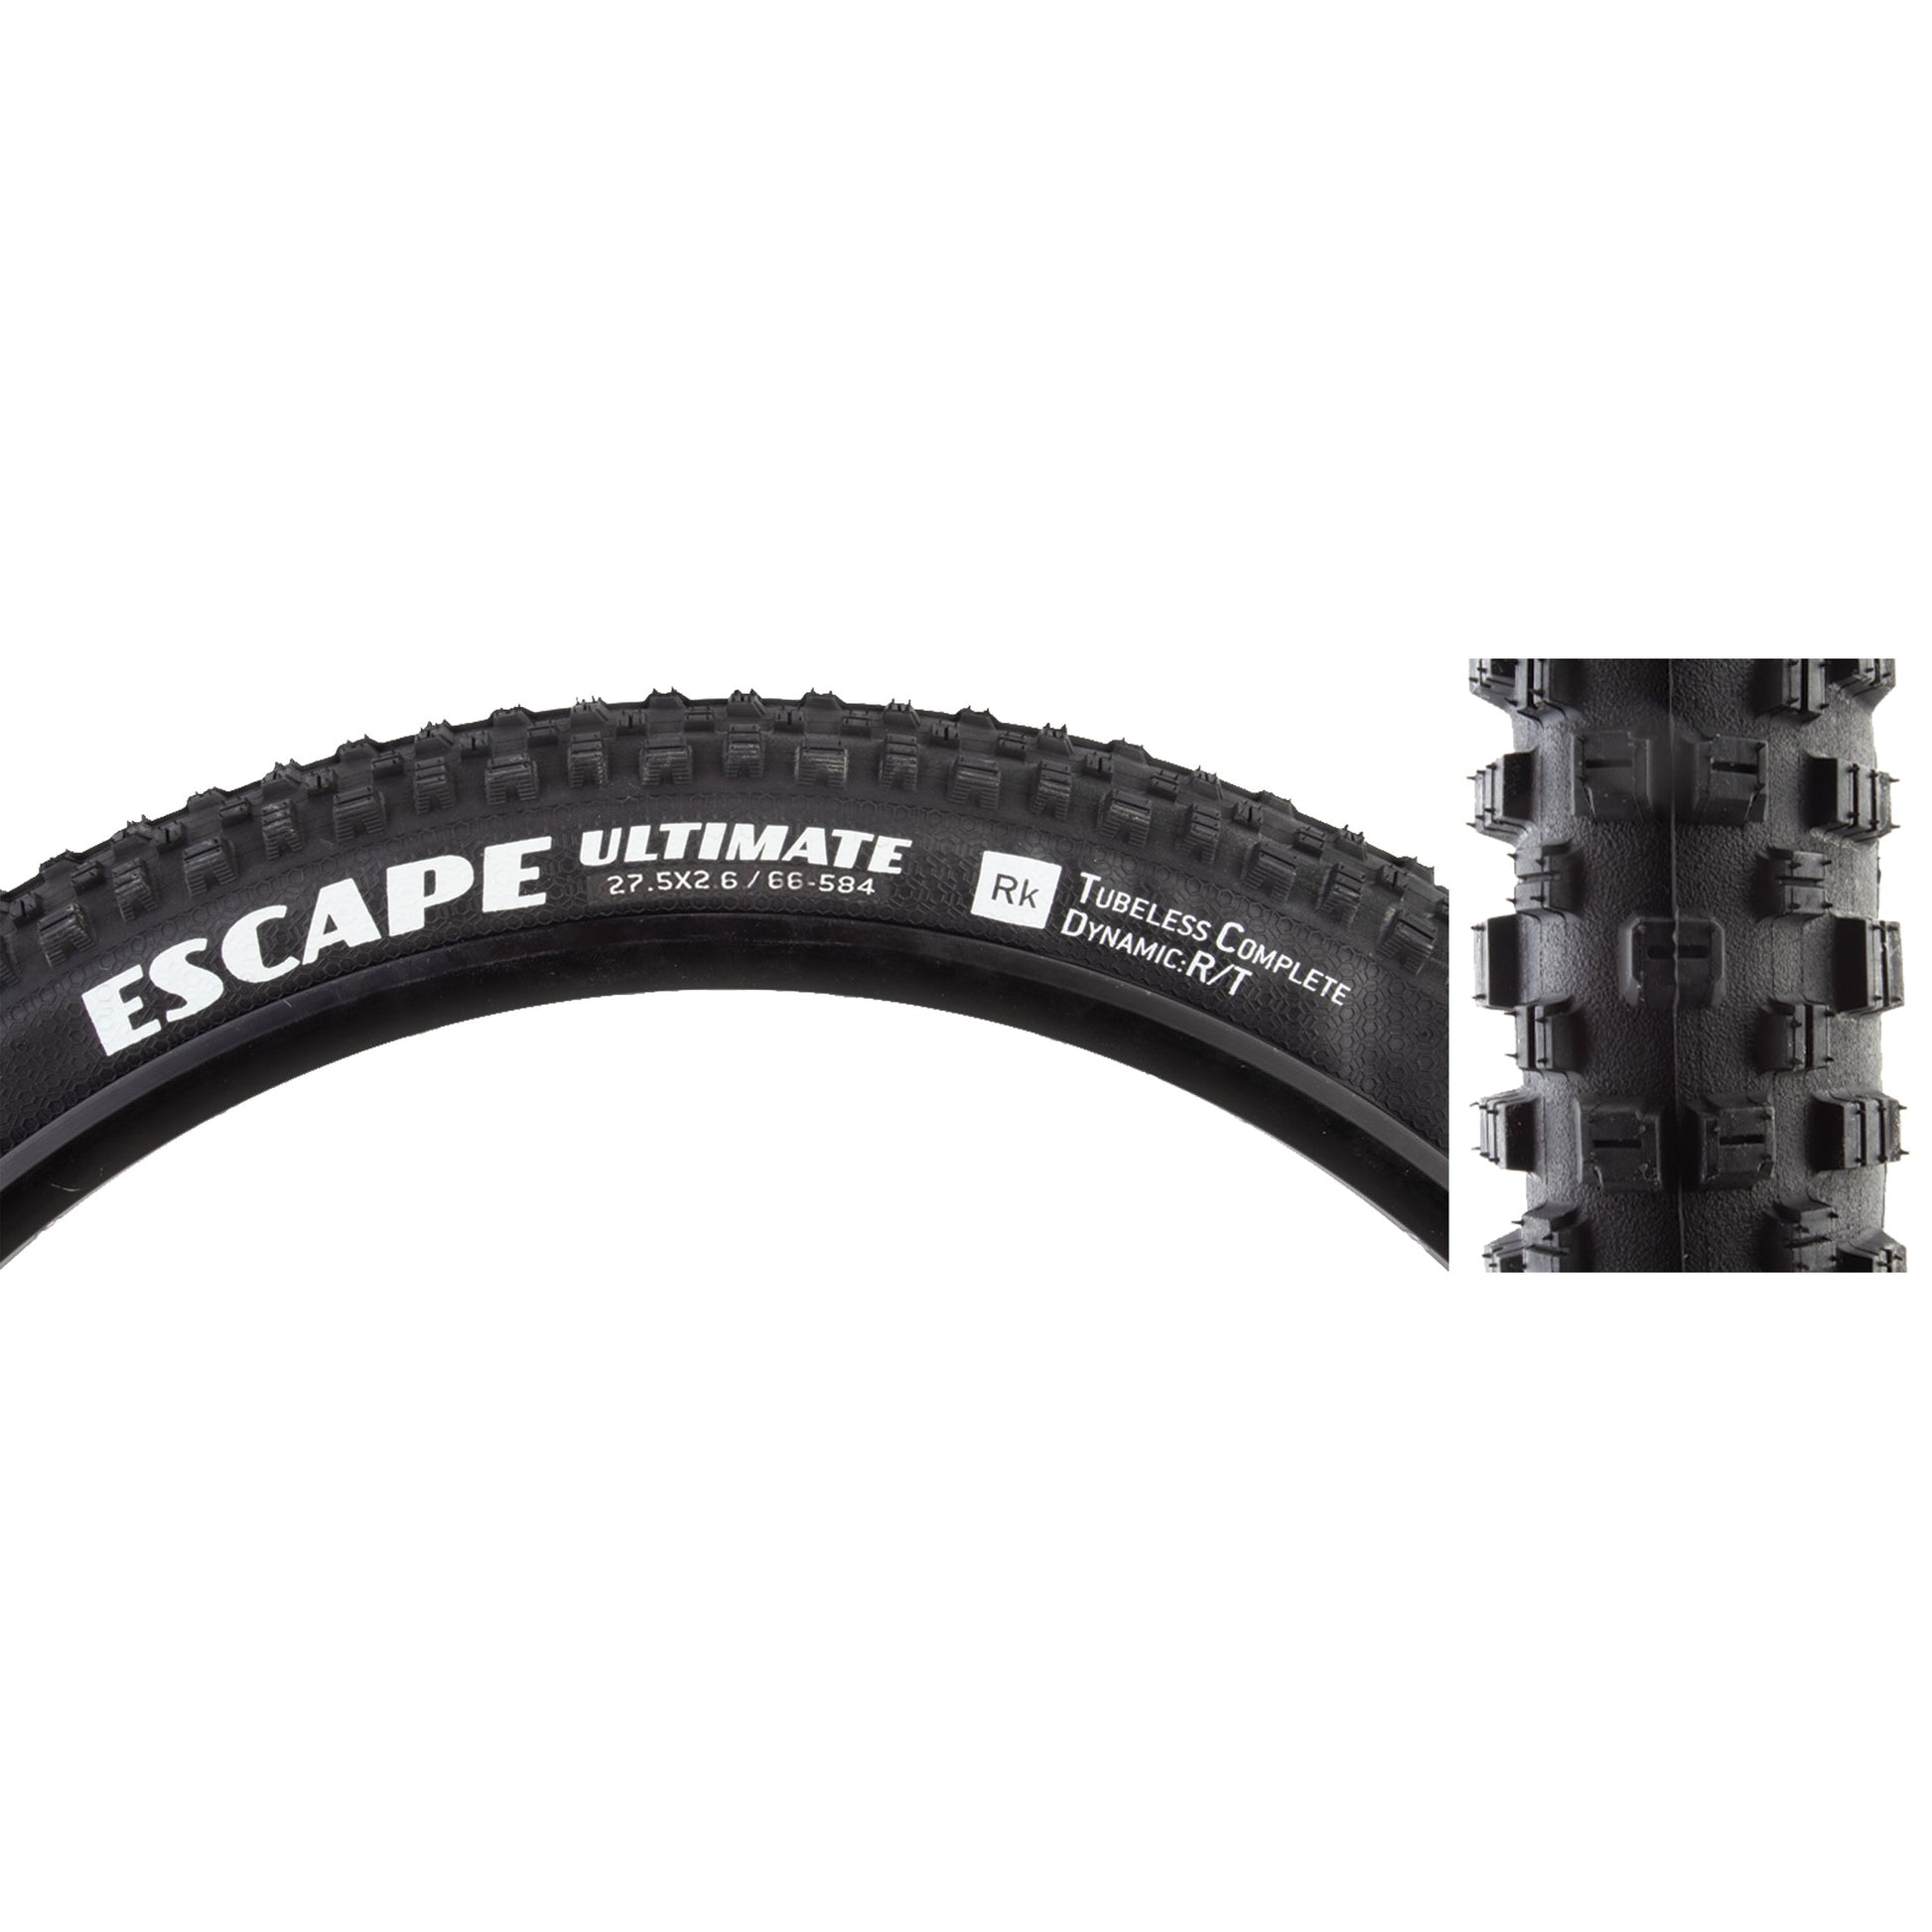 Goodyear Escape Ultimate 27.5" Mountain Bike Tire - Folding - TR - 27.5 x 2.6" - Tires - Bicycle Warehouse